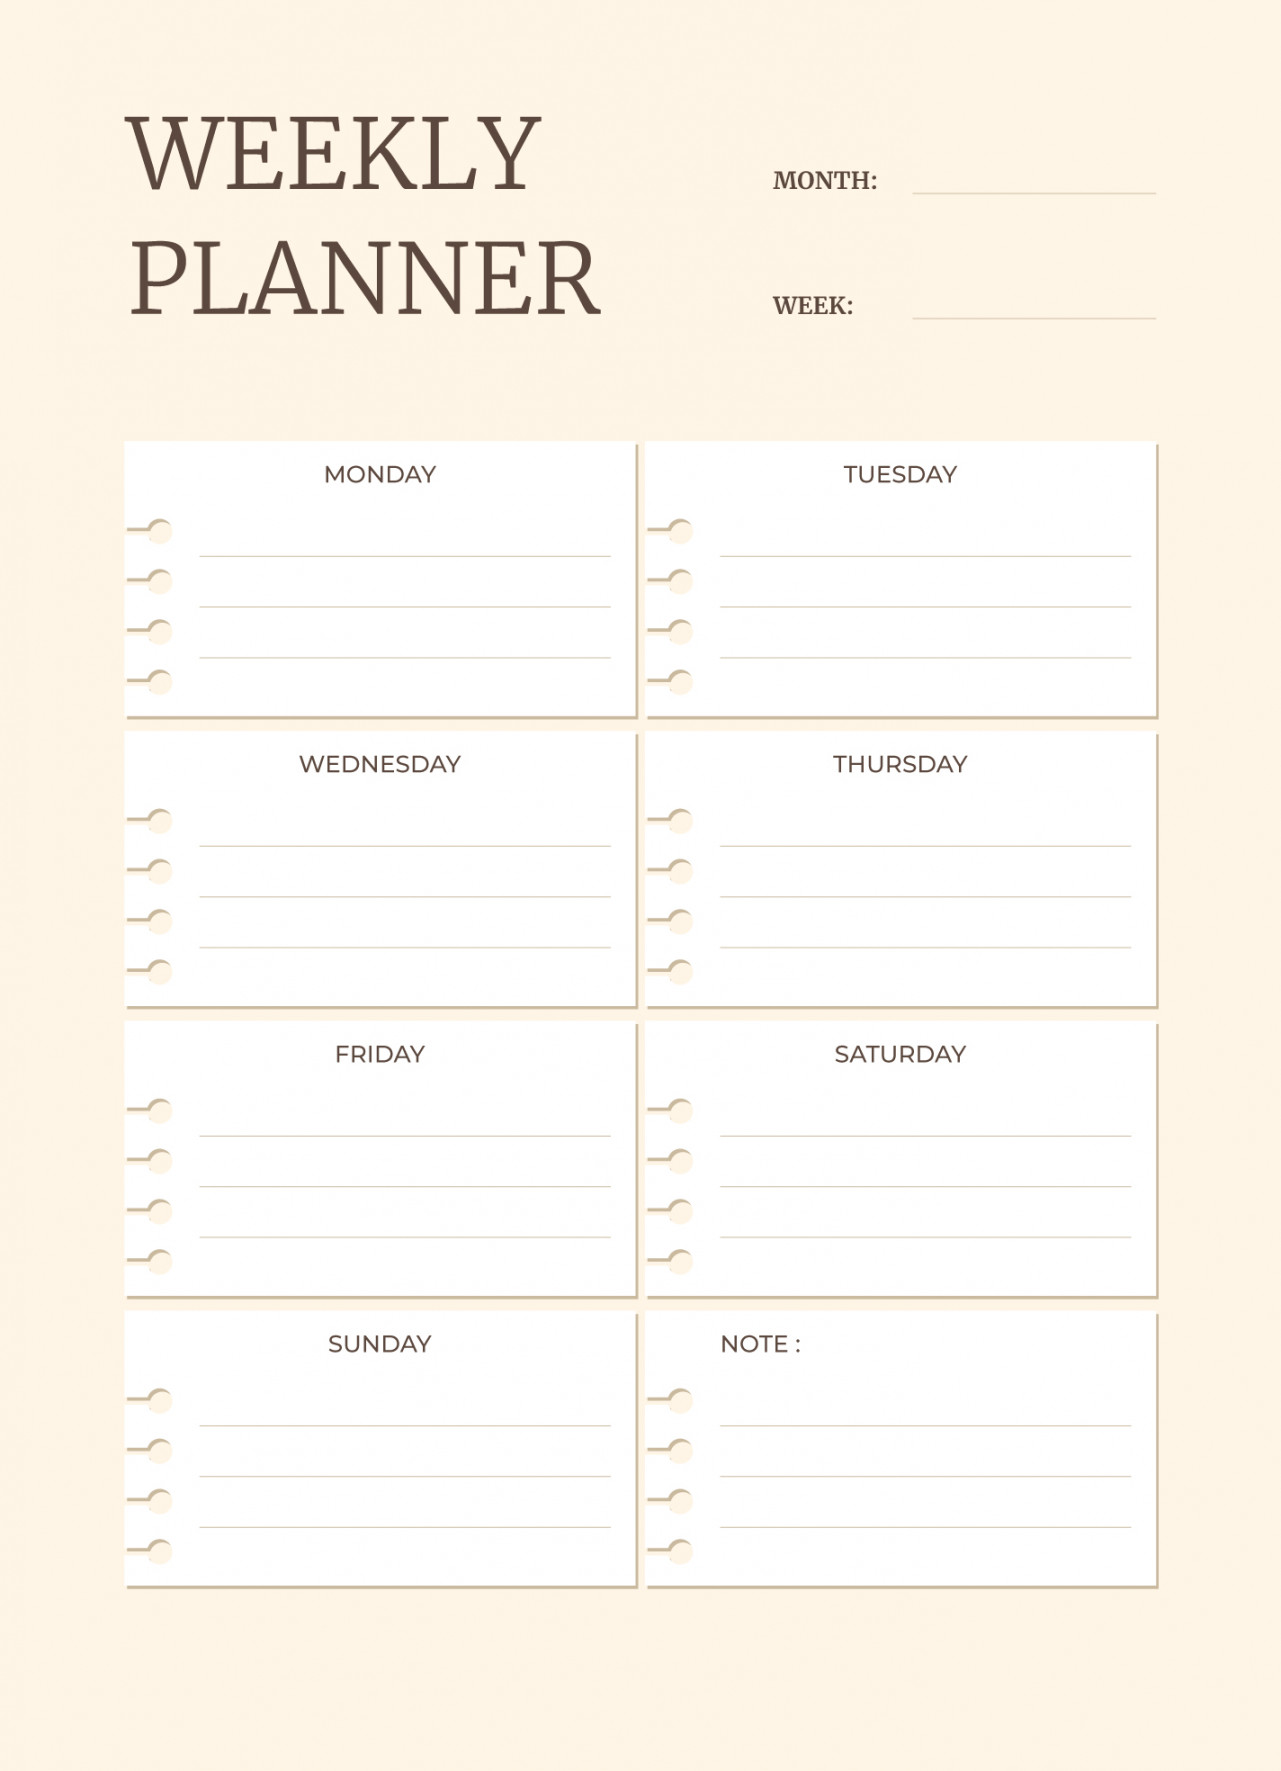 Cute Aesthetic Weekly Planner Free Google Docs Template - gdoc